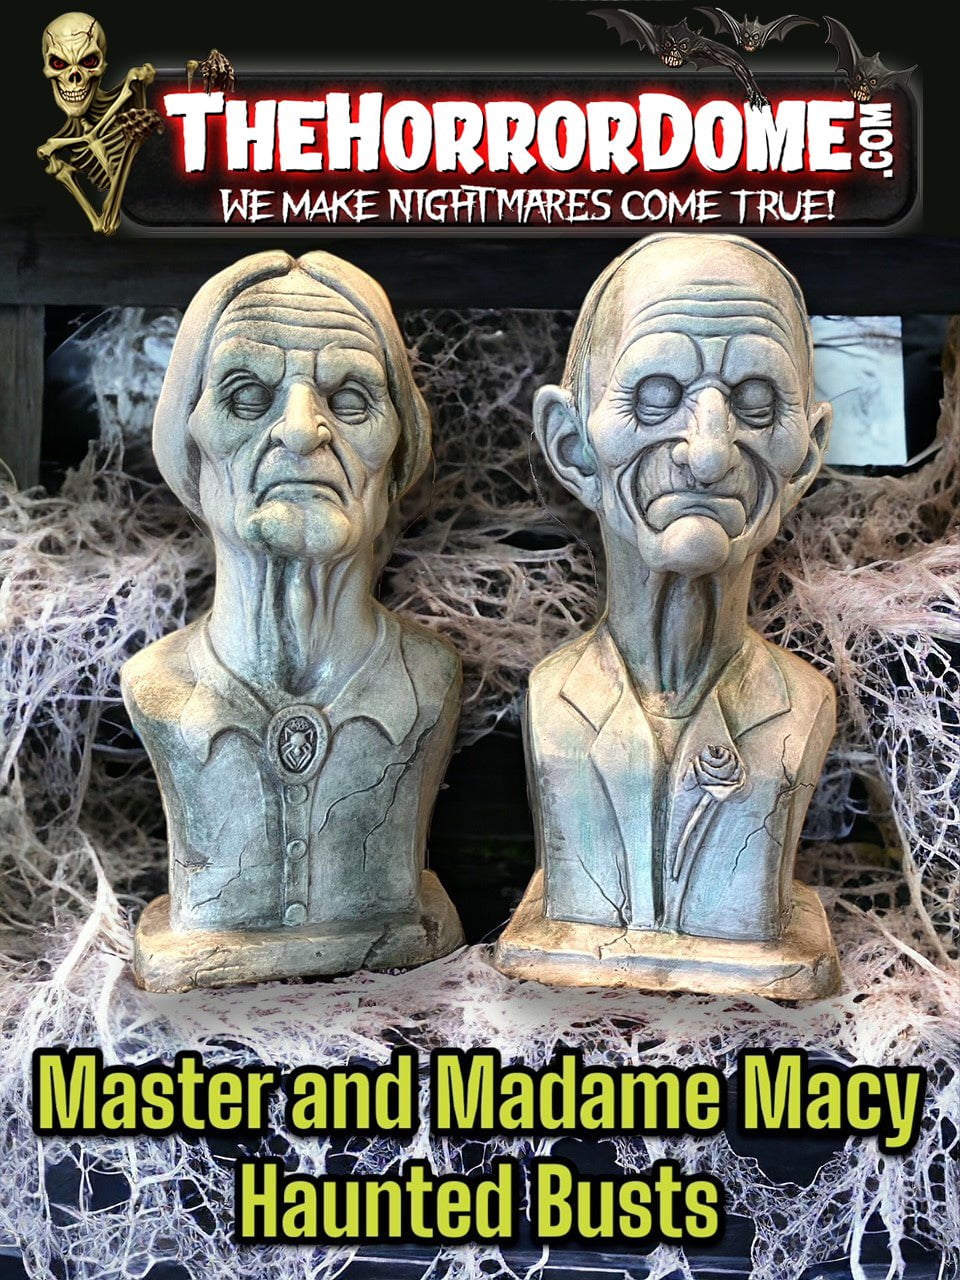 "Madam and Master Macy Ghostly Manor Busts" HD Exclusive Halloween Decoration